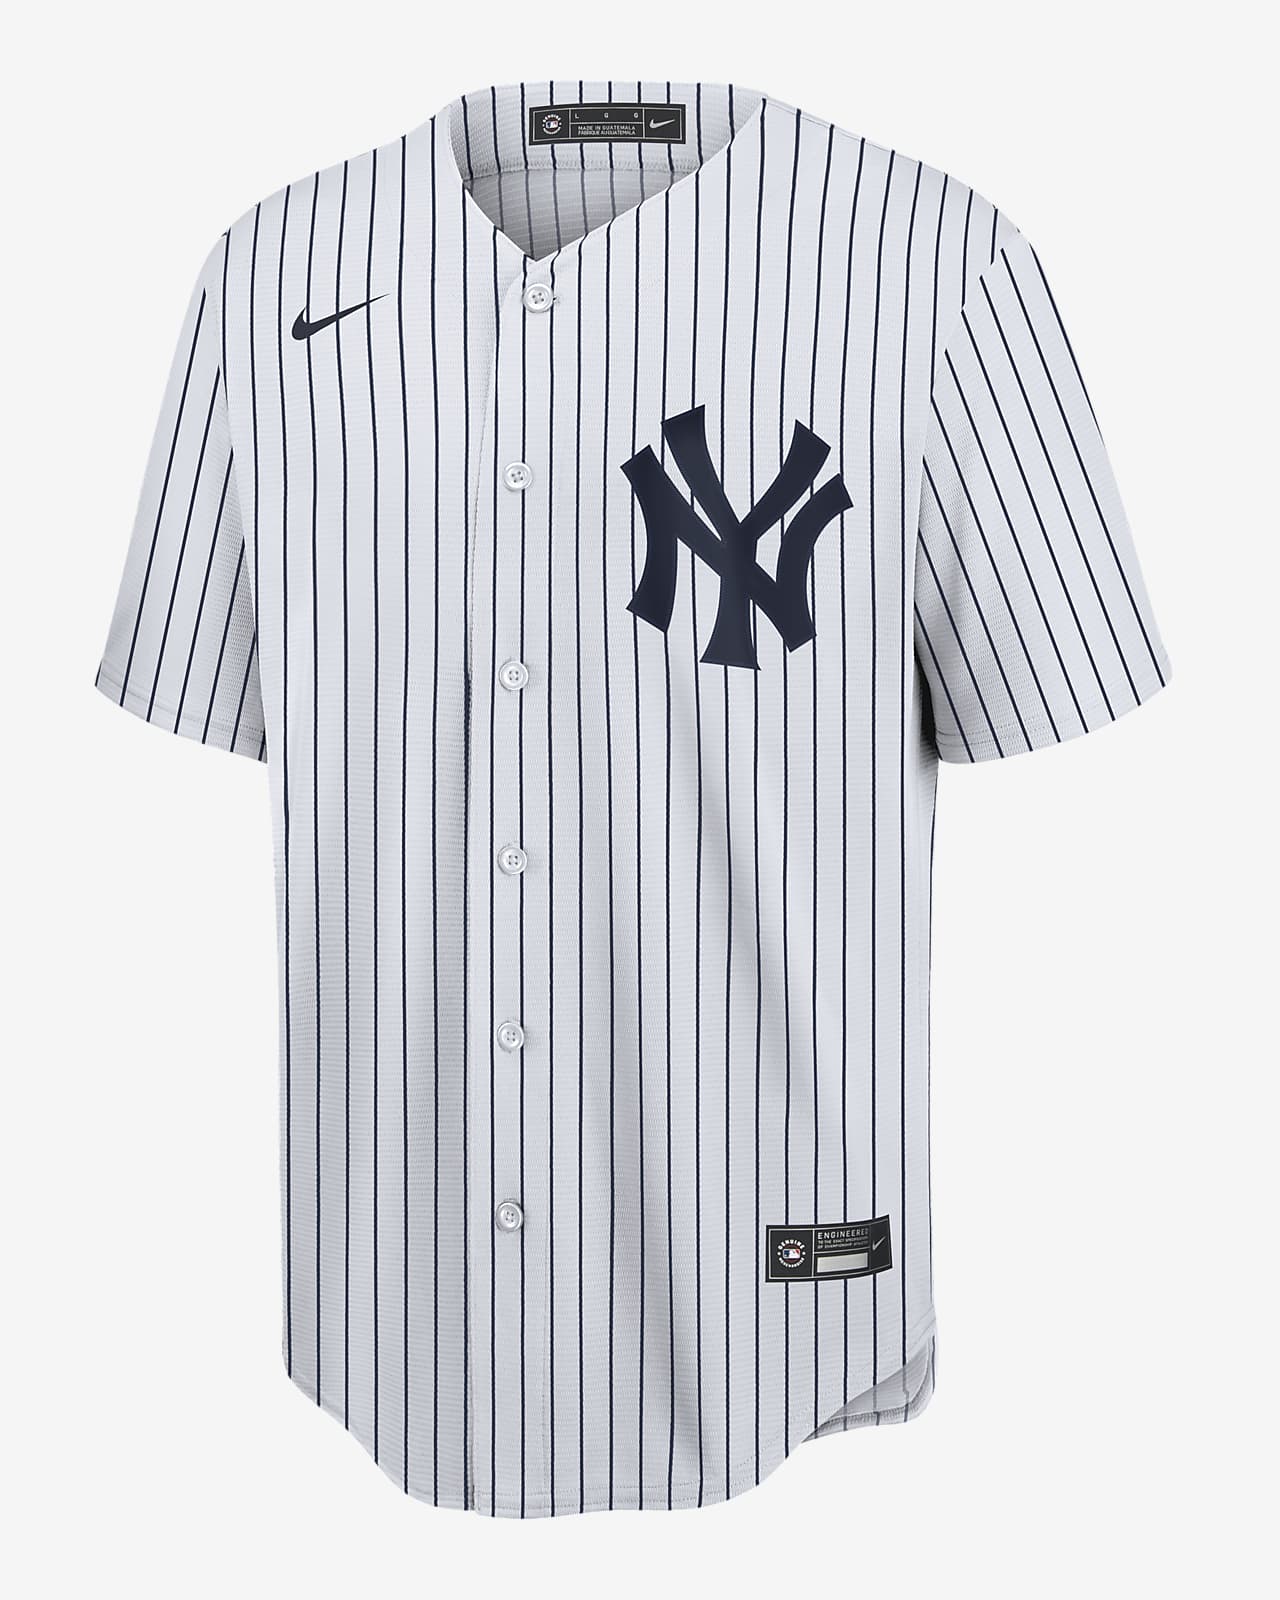 yankee shirts for youth